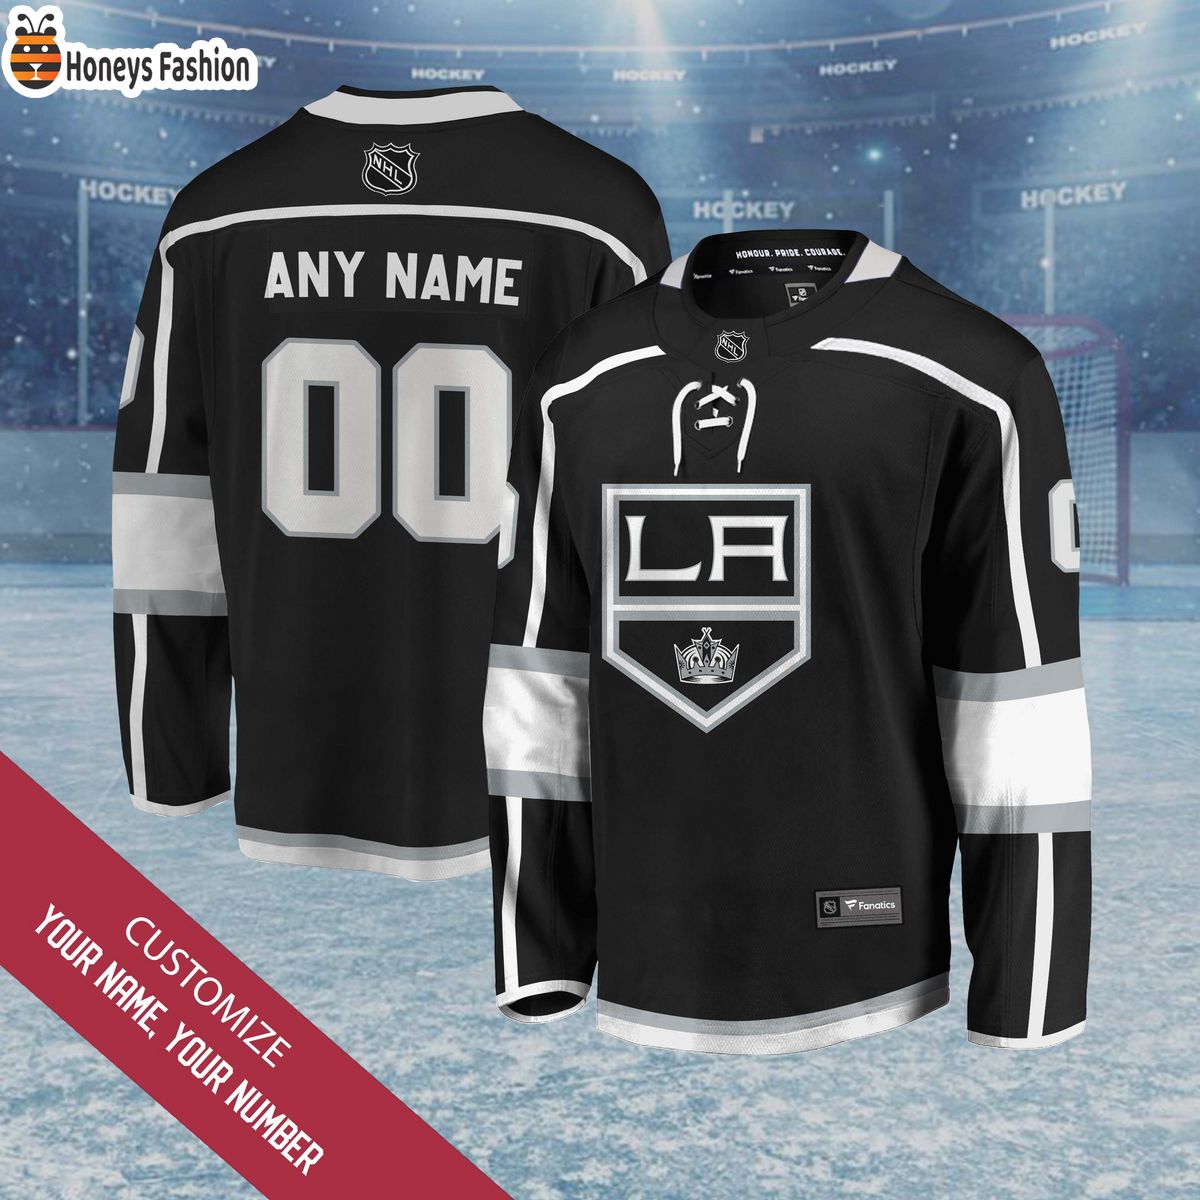 Los Angeles Kings Personalized Hockey Jersey